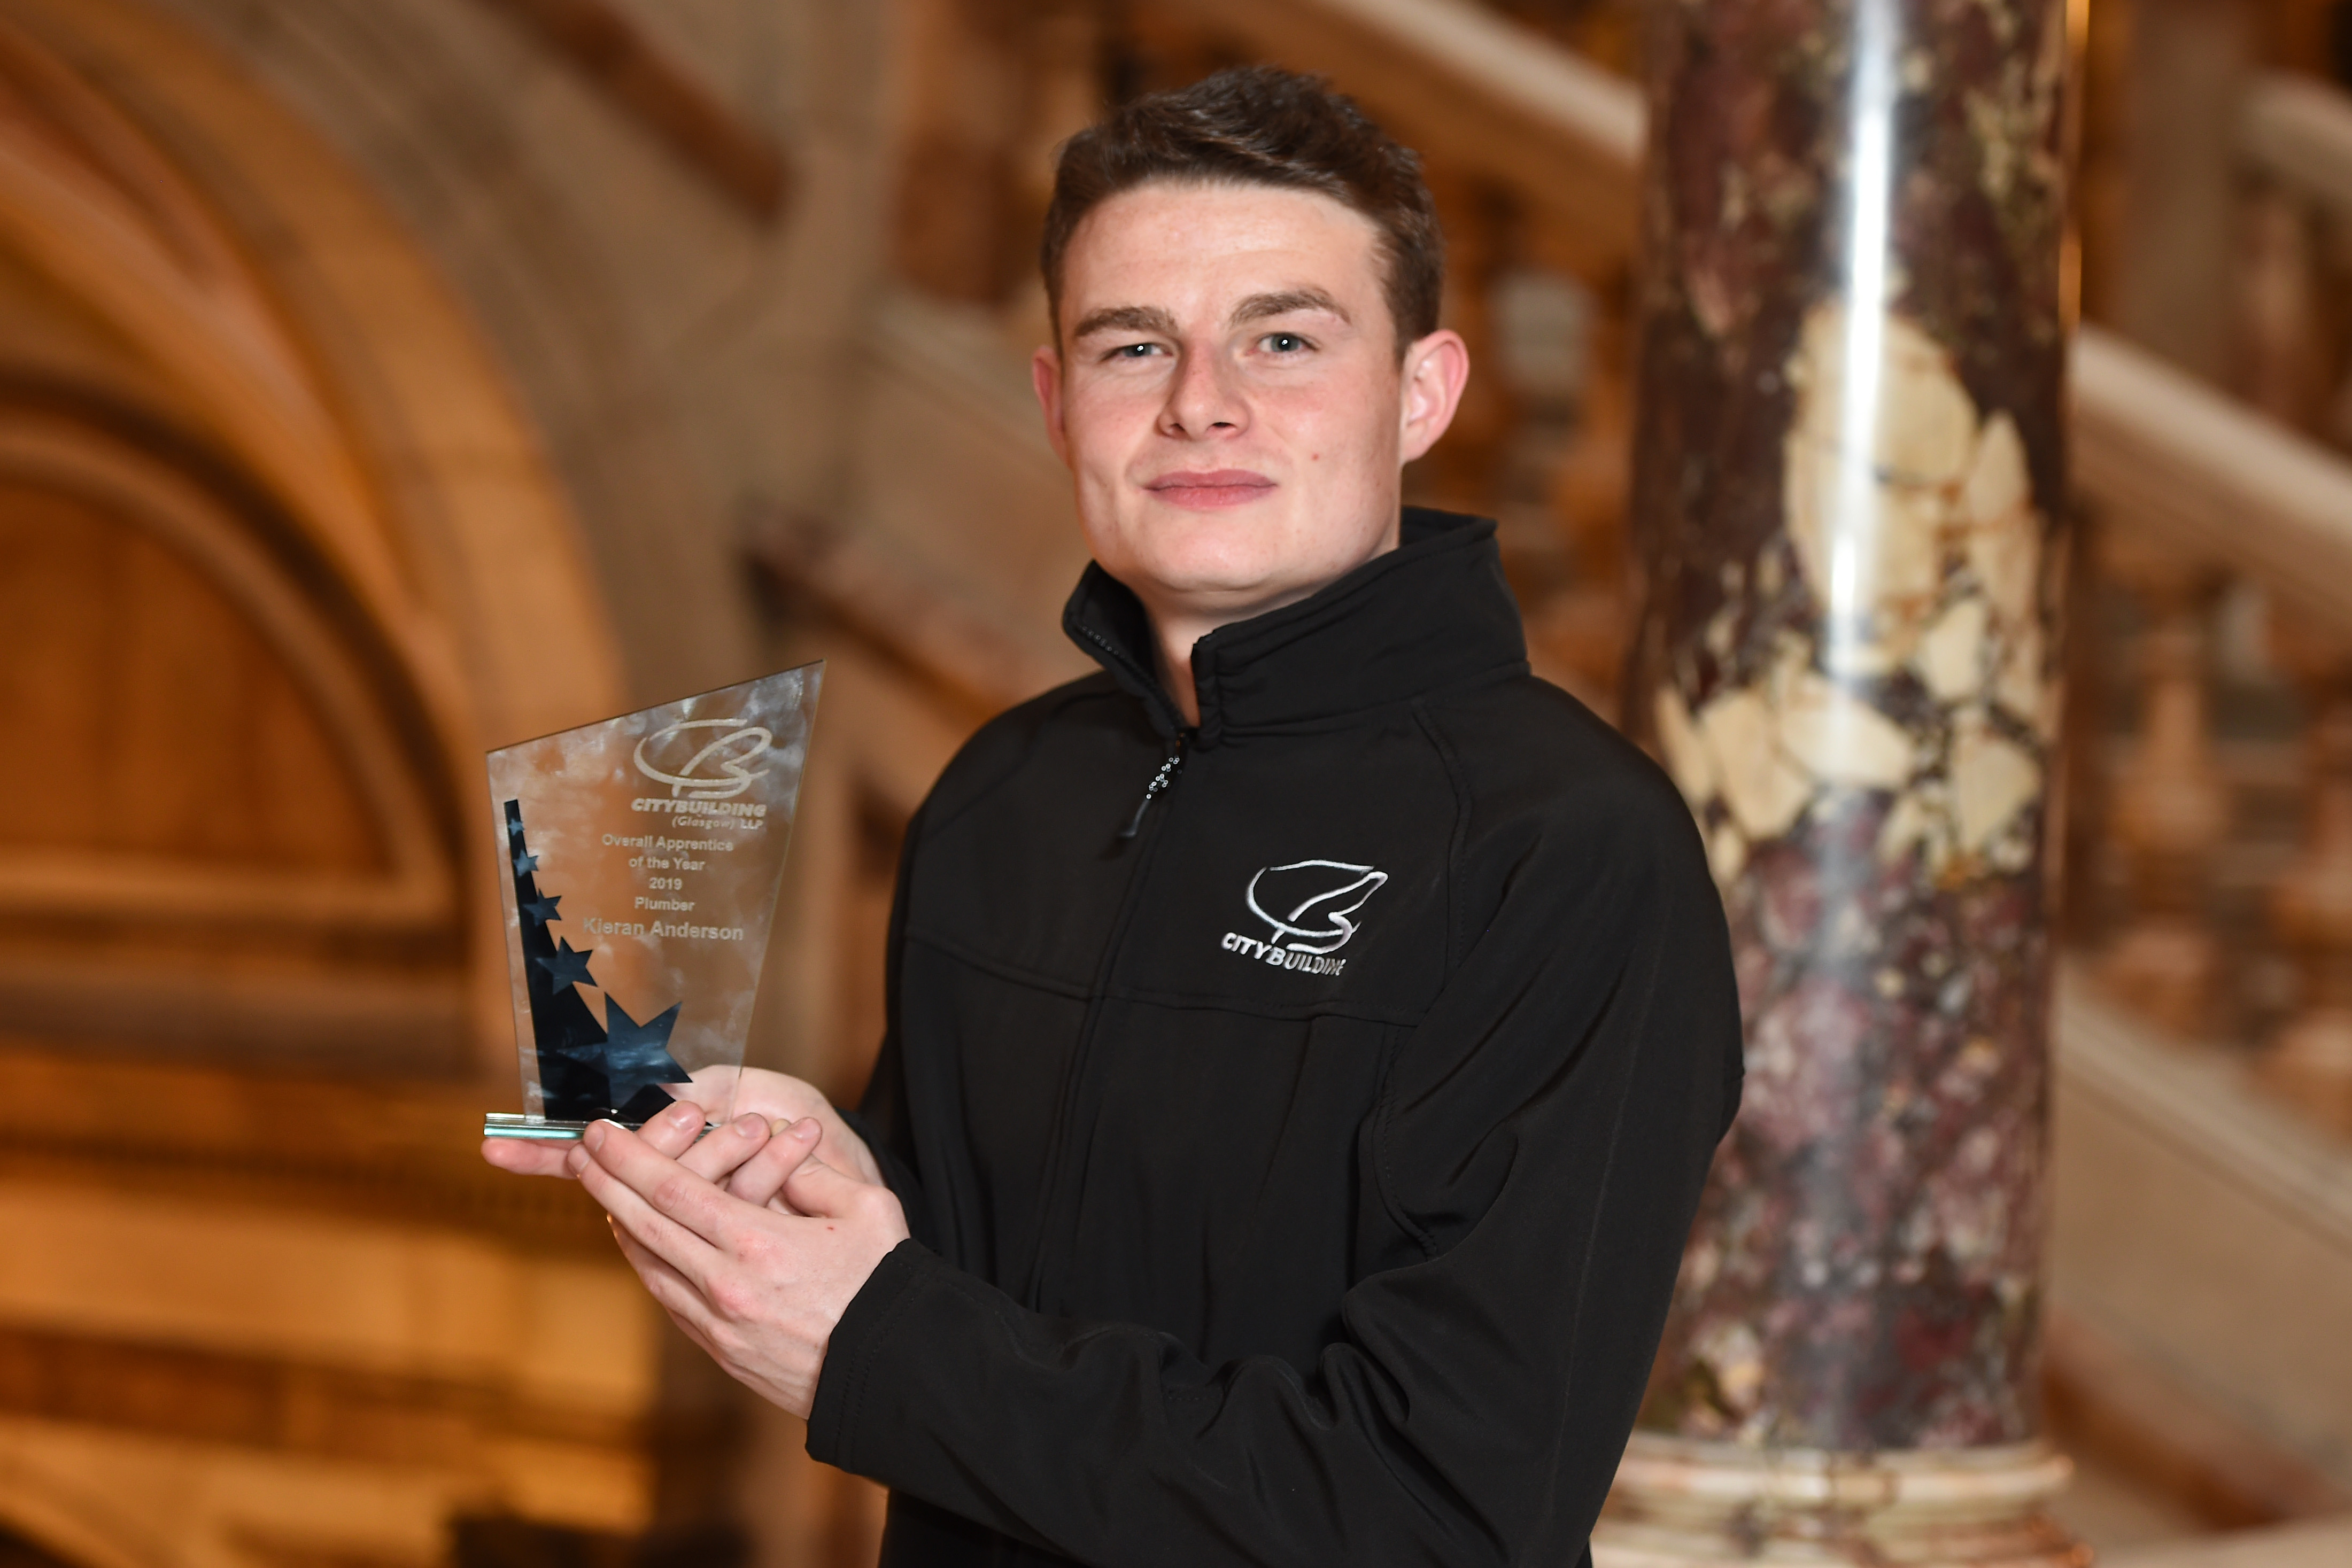 Glasgow’s young tradespeople celebrated at City Building awards